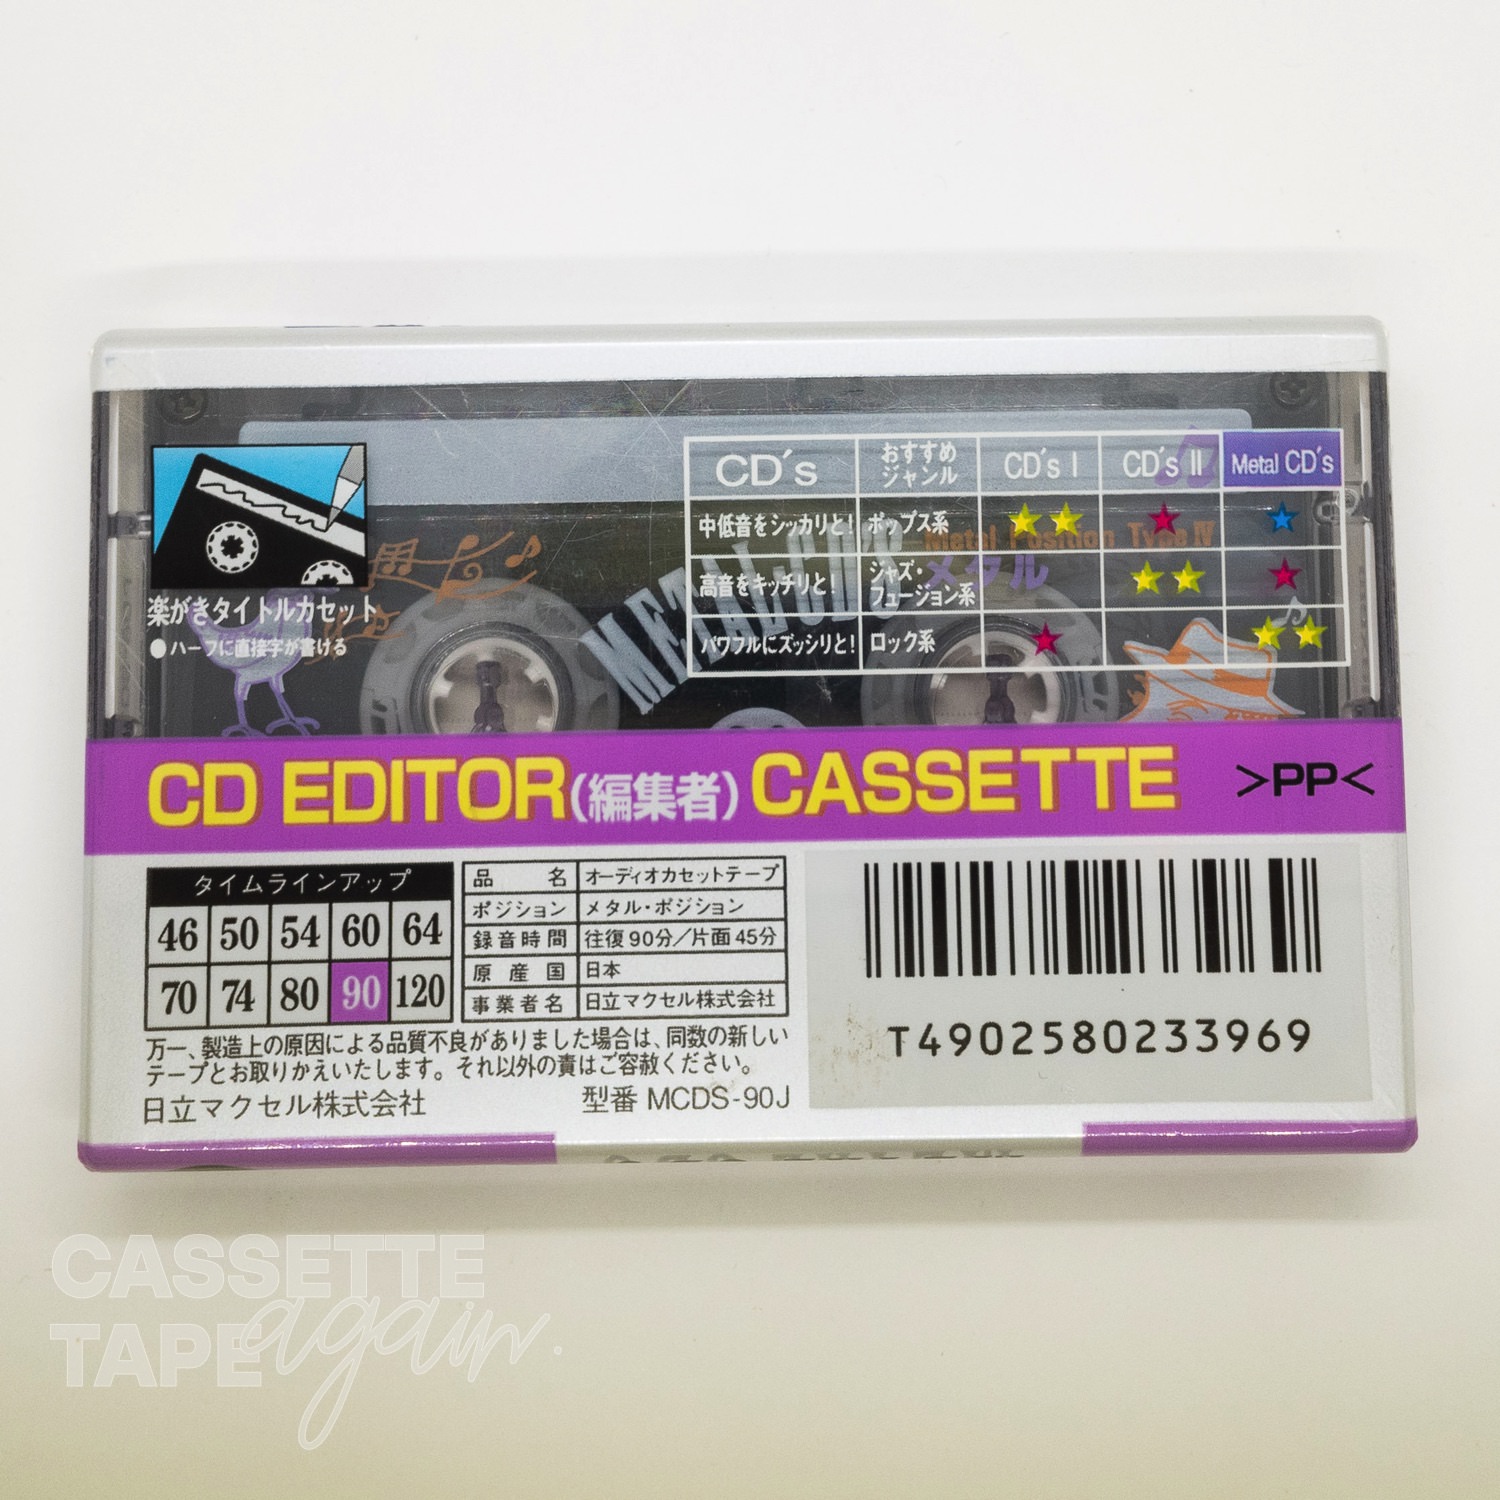 METAL CD's 90 / maxell(メタル) - CASSETTE TAPE again.